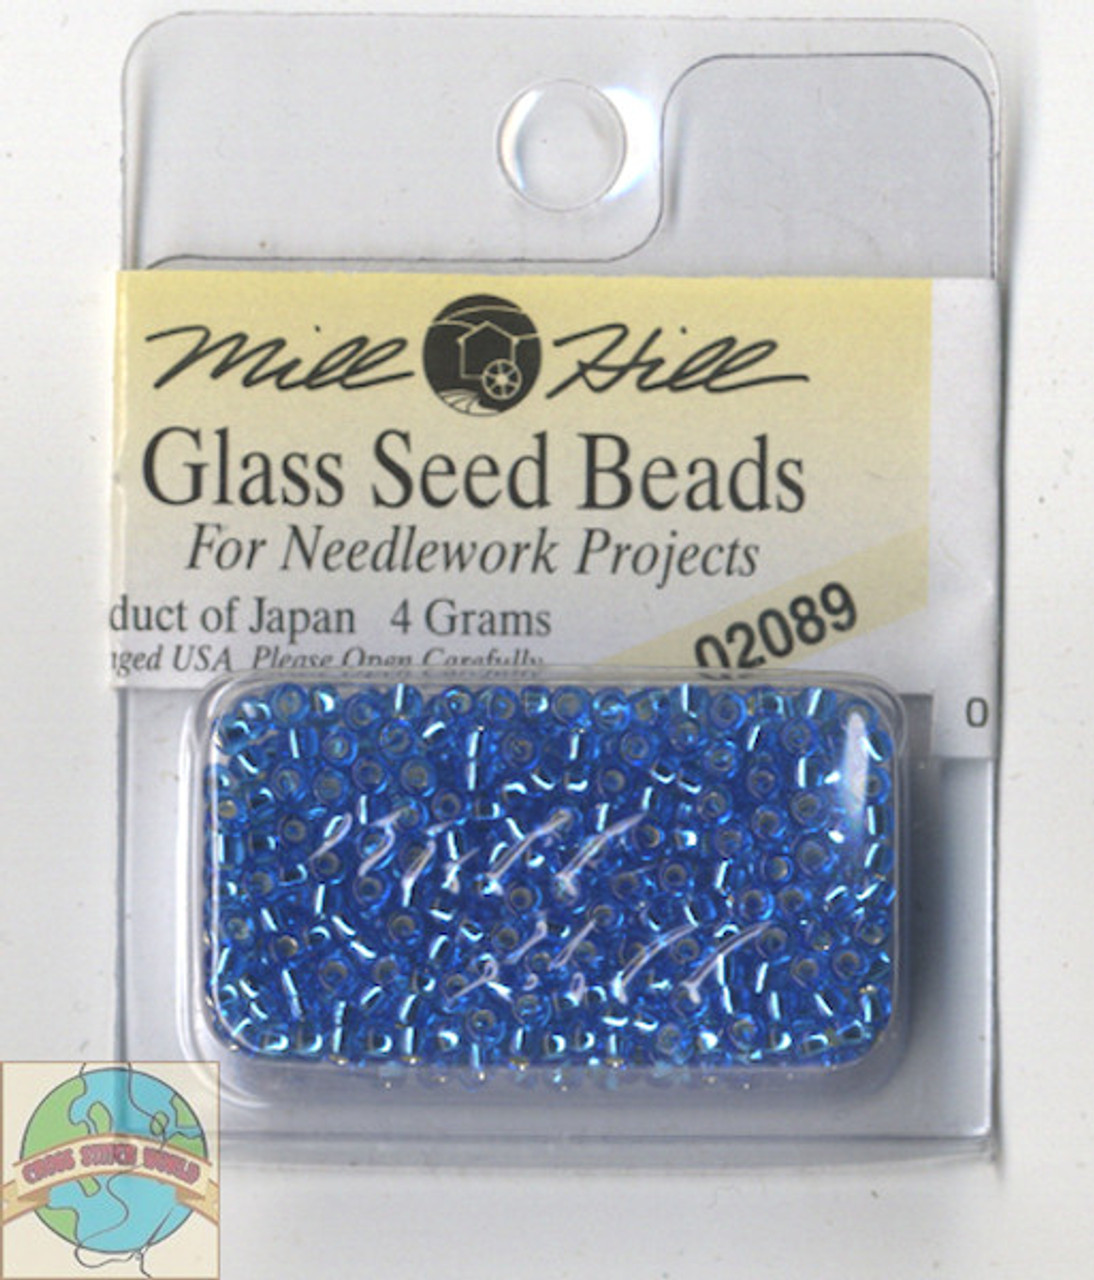 Mill Hill Glass Seed Beads 4g Brilliant Sea Blue #02089